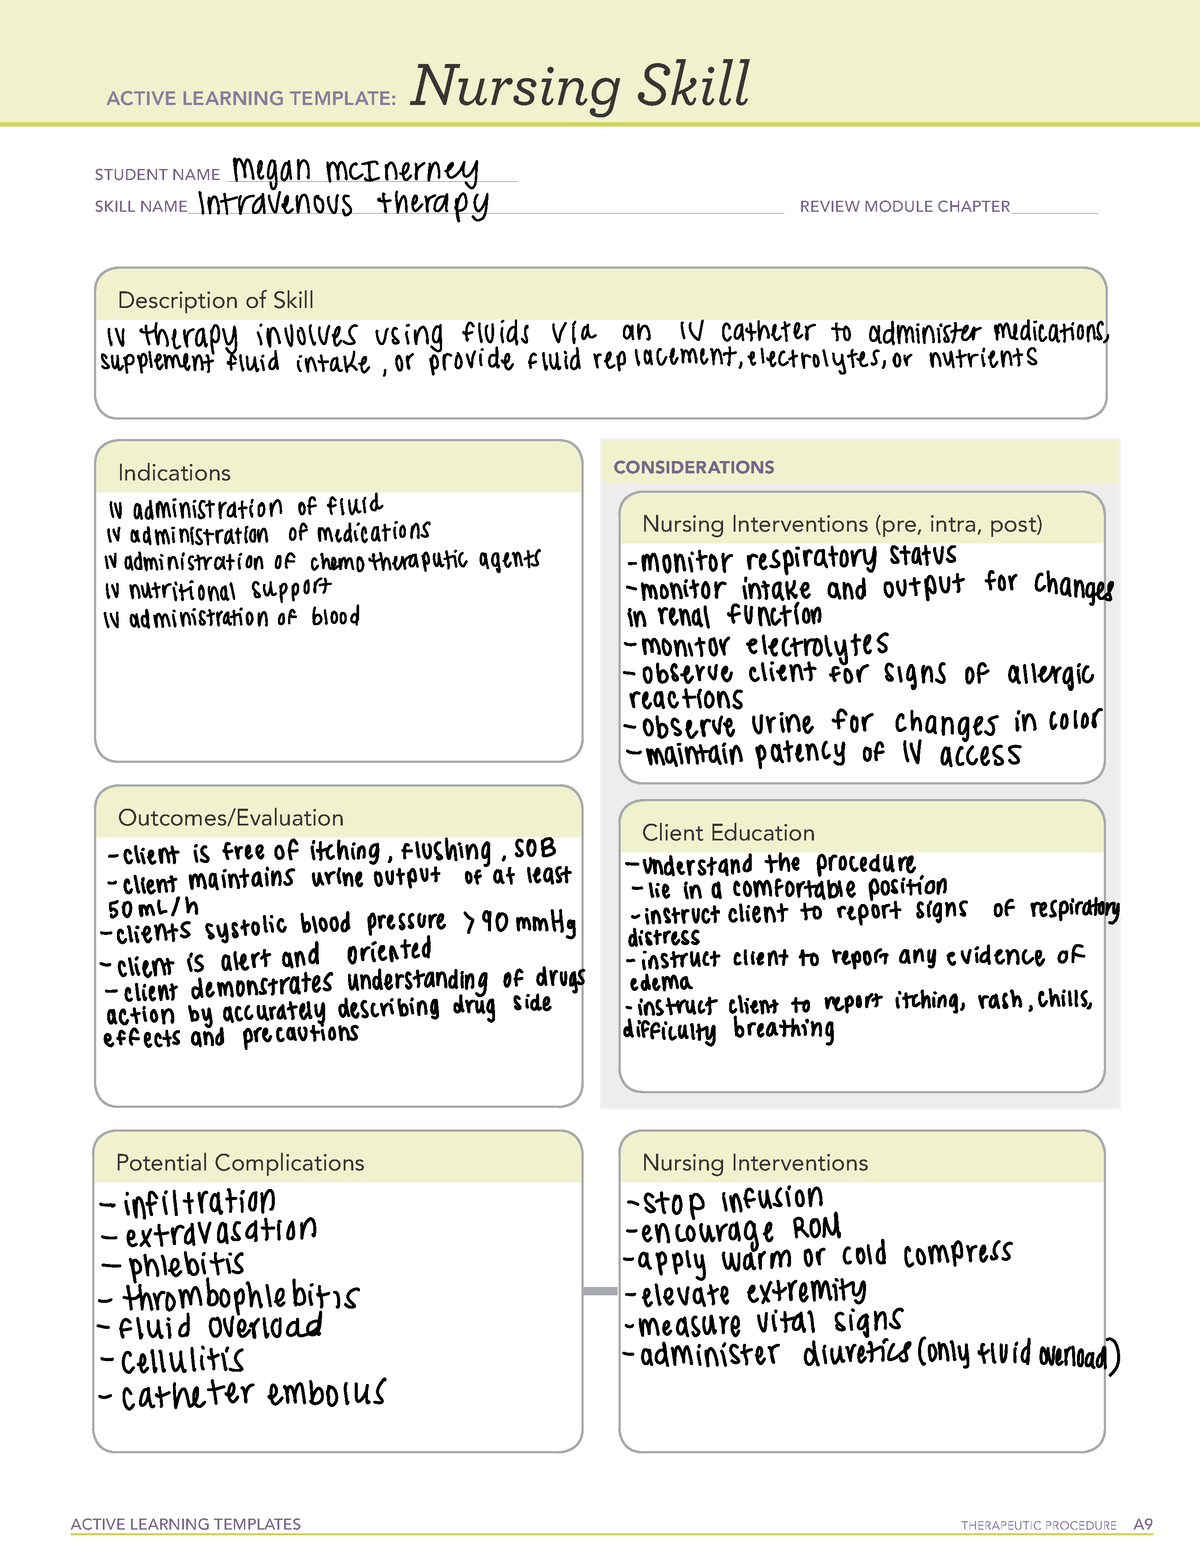 active-learning-template-iv-therapy-active-learning-templates